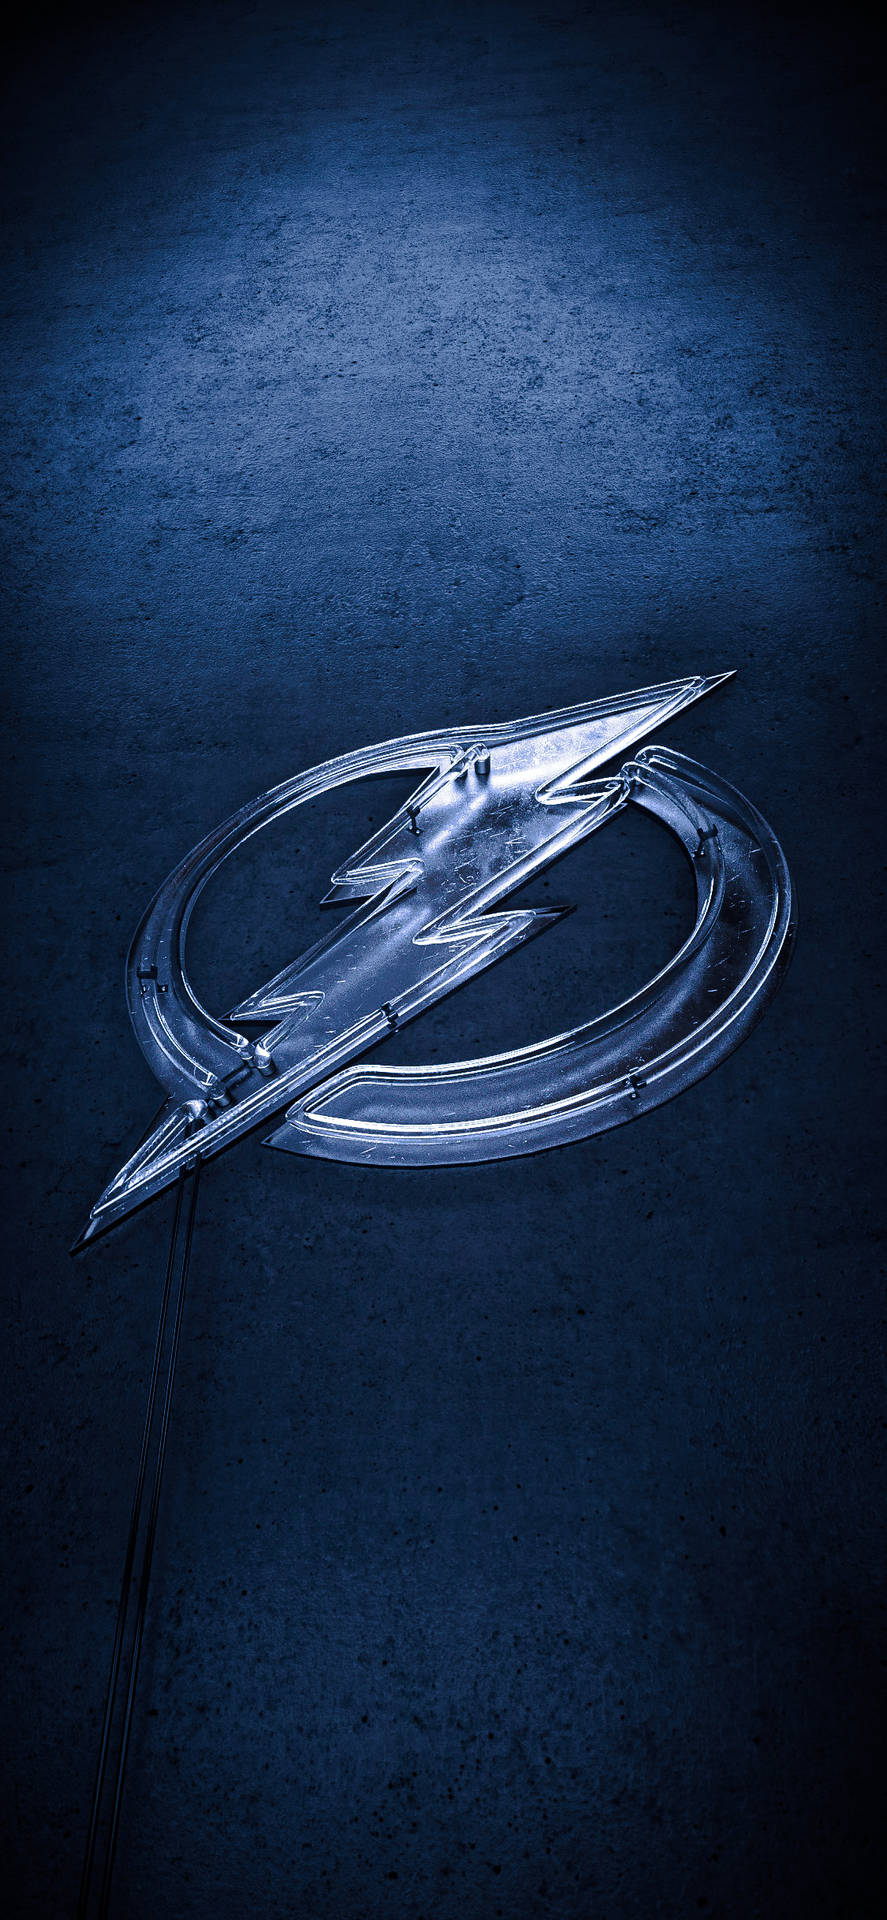 Silver And Blue Tampa Bay Lightning Wallpaper